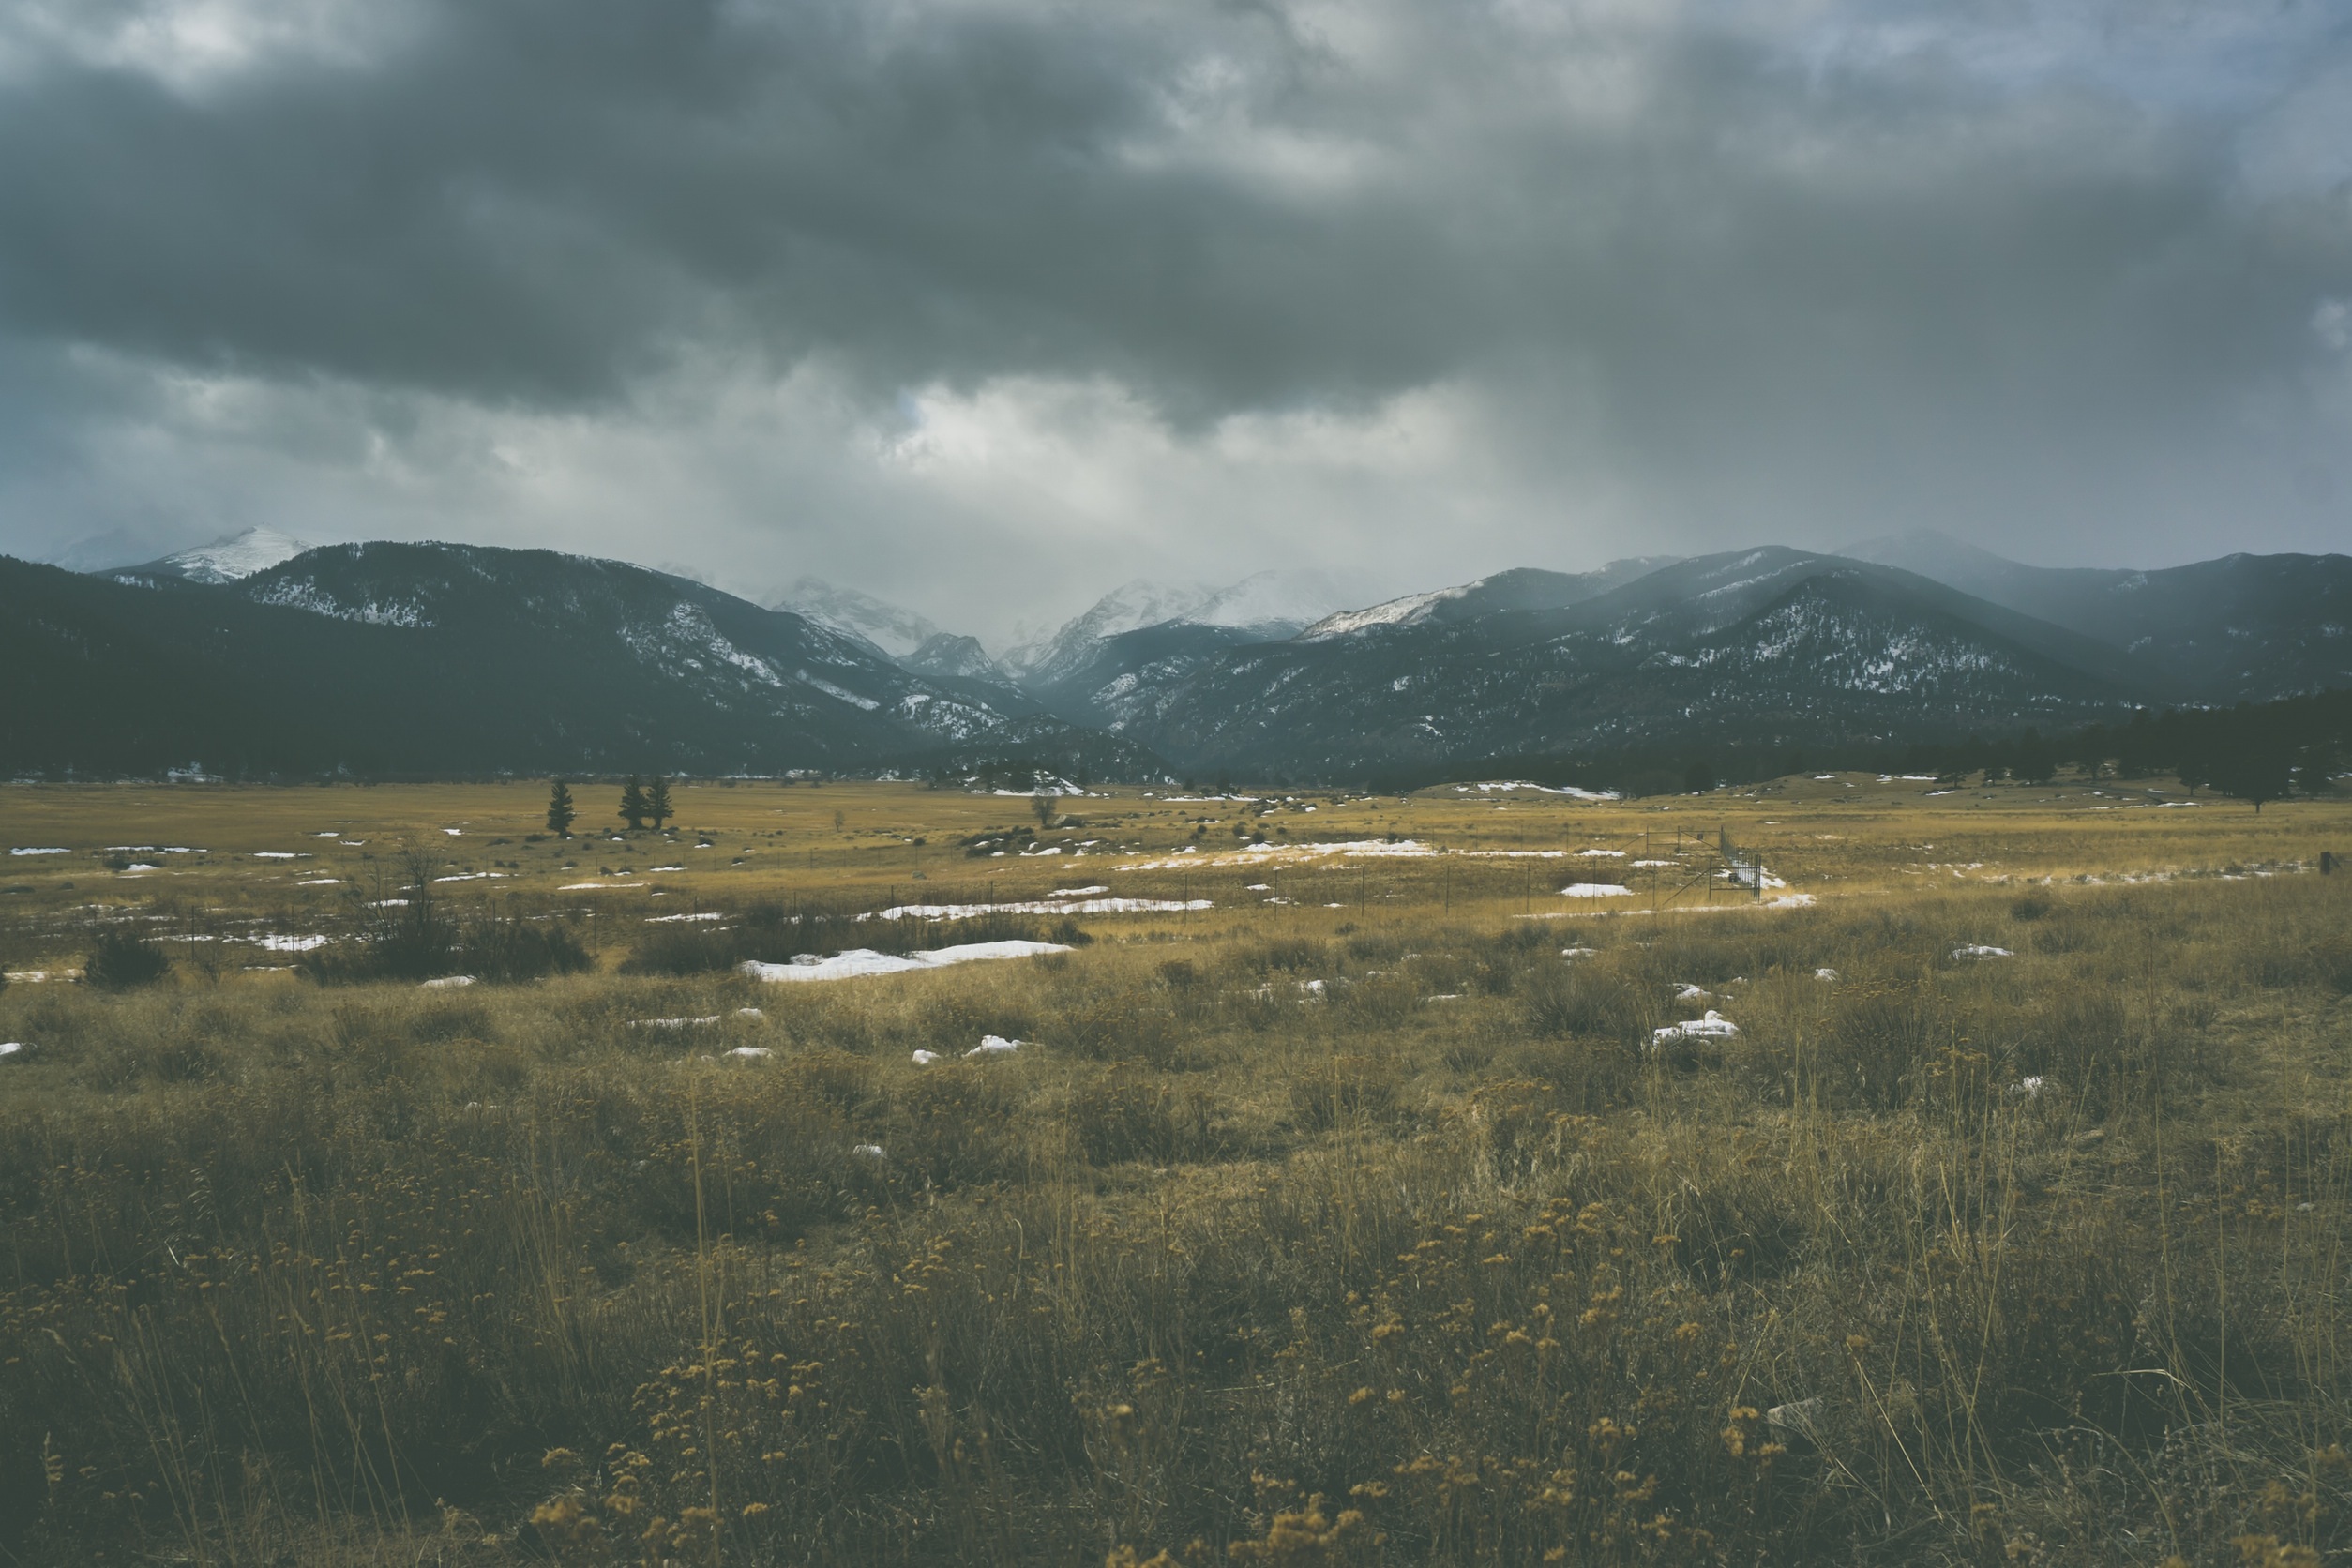 mainly cloudy, nature, grass, sky, mountains, clouds, overcast